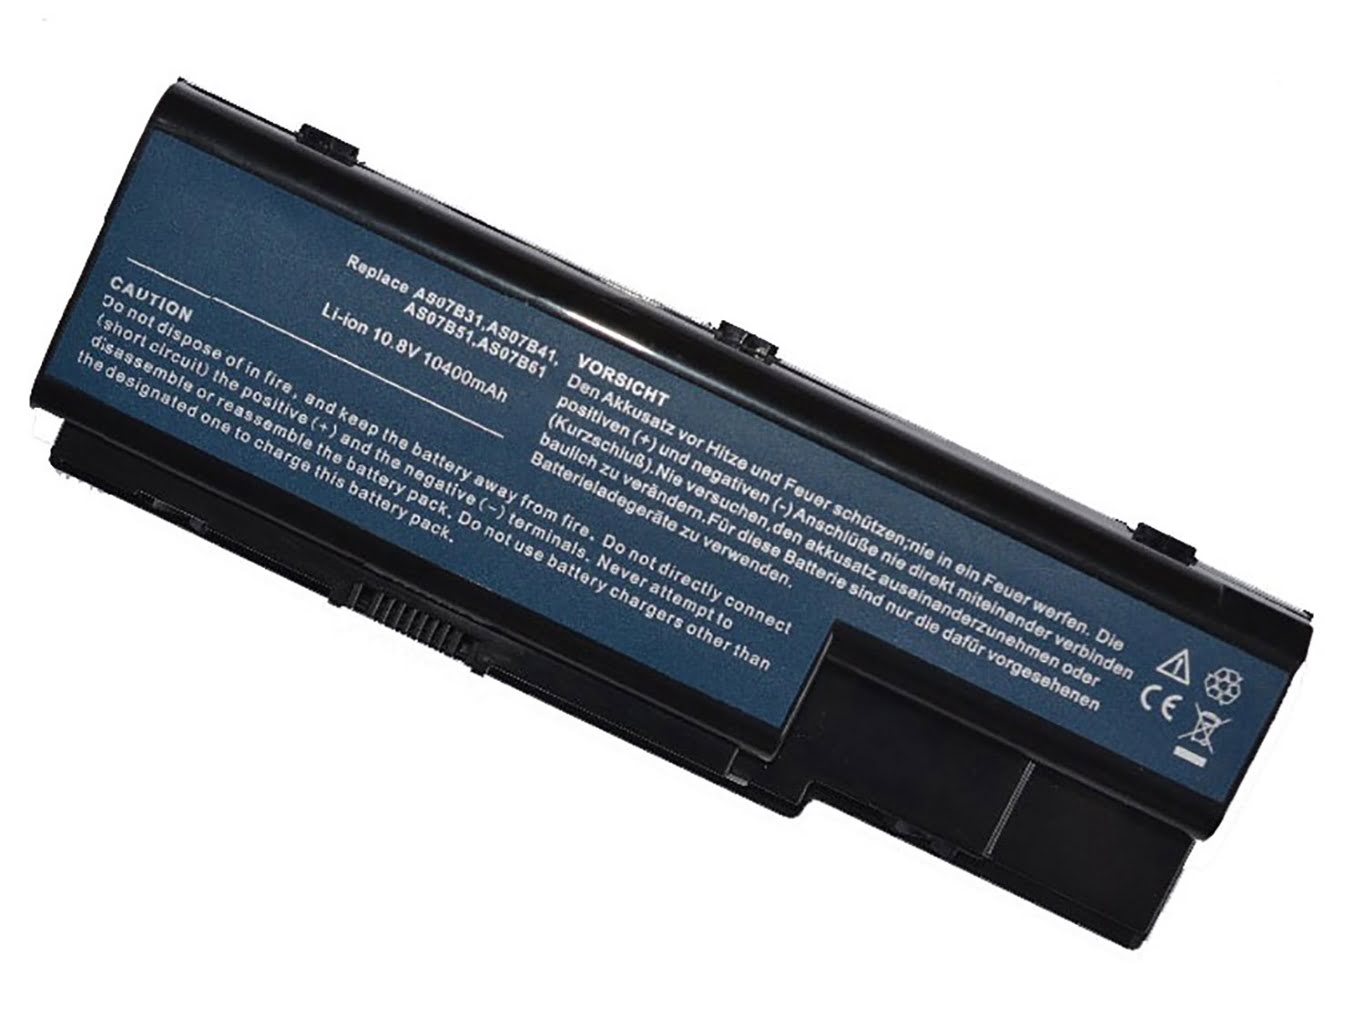 AK.006BT.019, AS07B31 replacement Laptop Battery for Acer Aspire 5220, Aspire 5230, 8800mAh, 12 cells, 10.8V